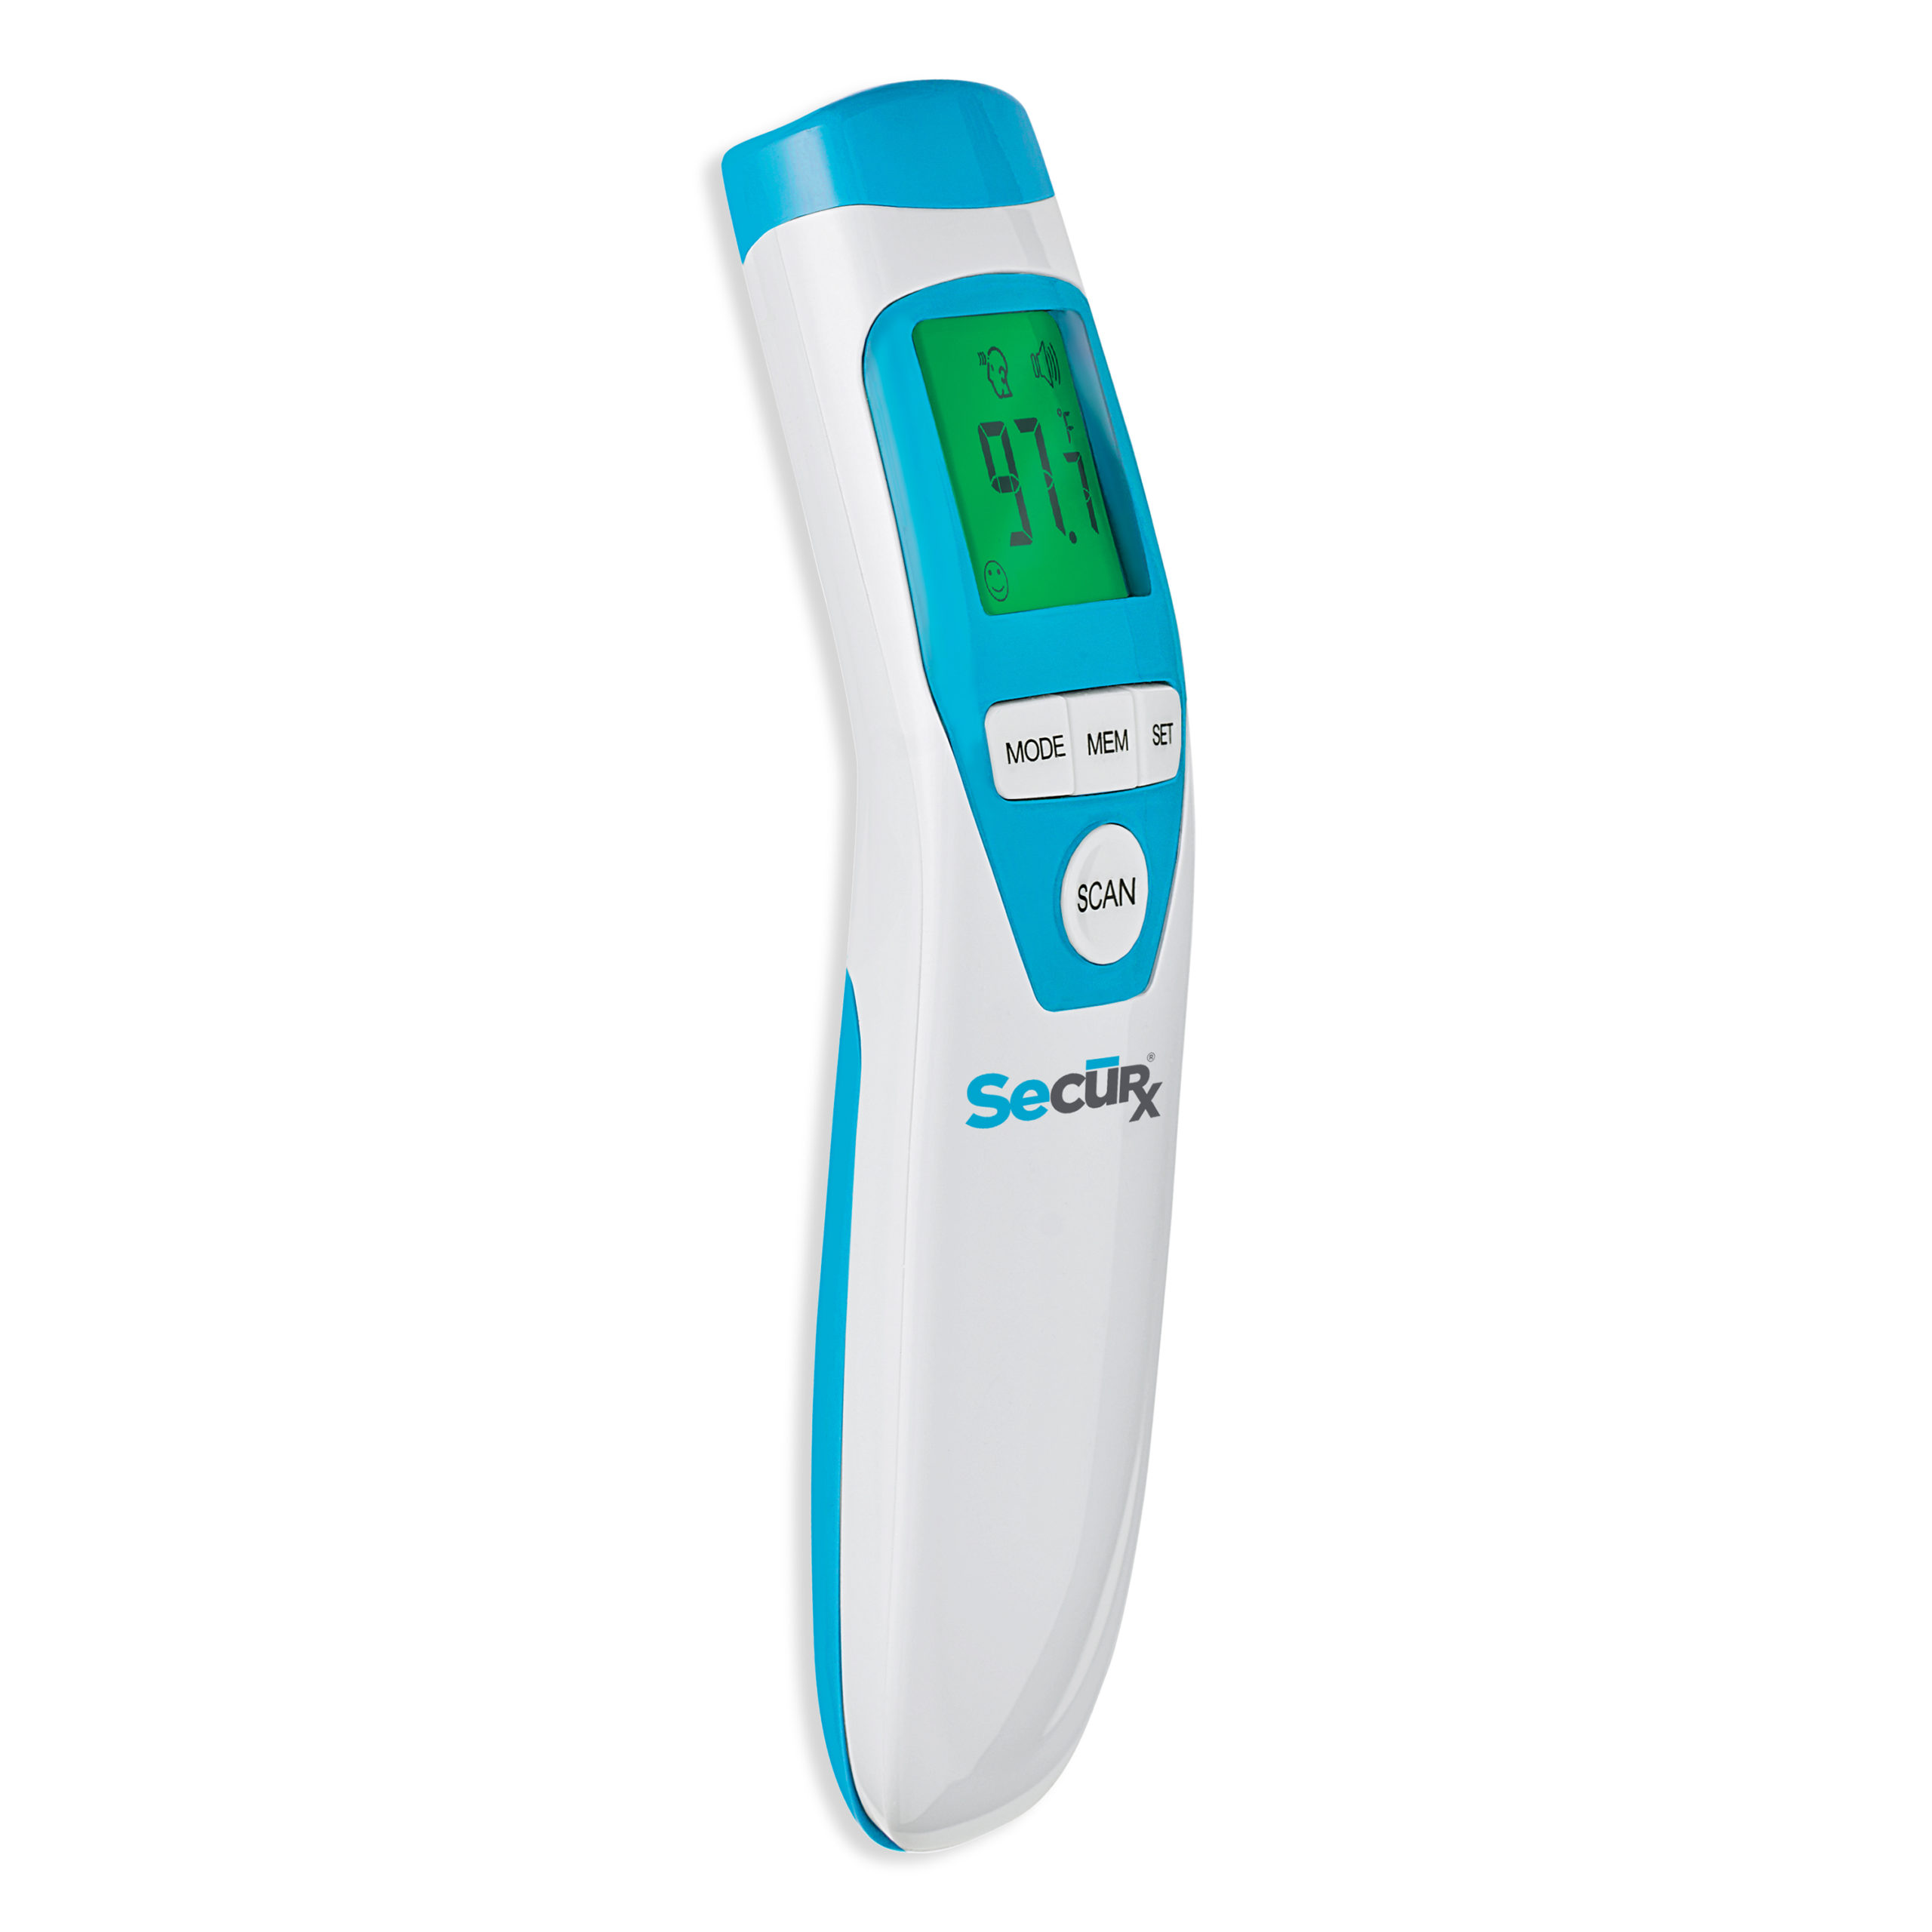 DT-8836P Ultra Fast Infrared Forehead Thermometer